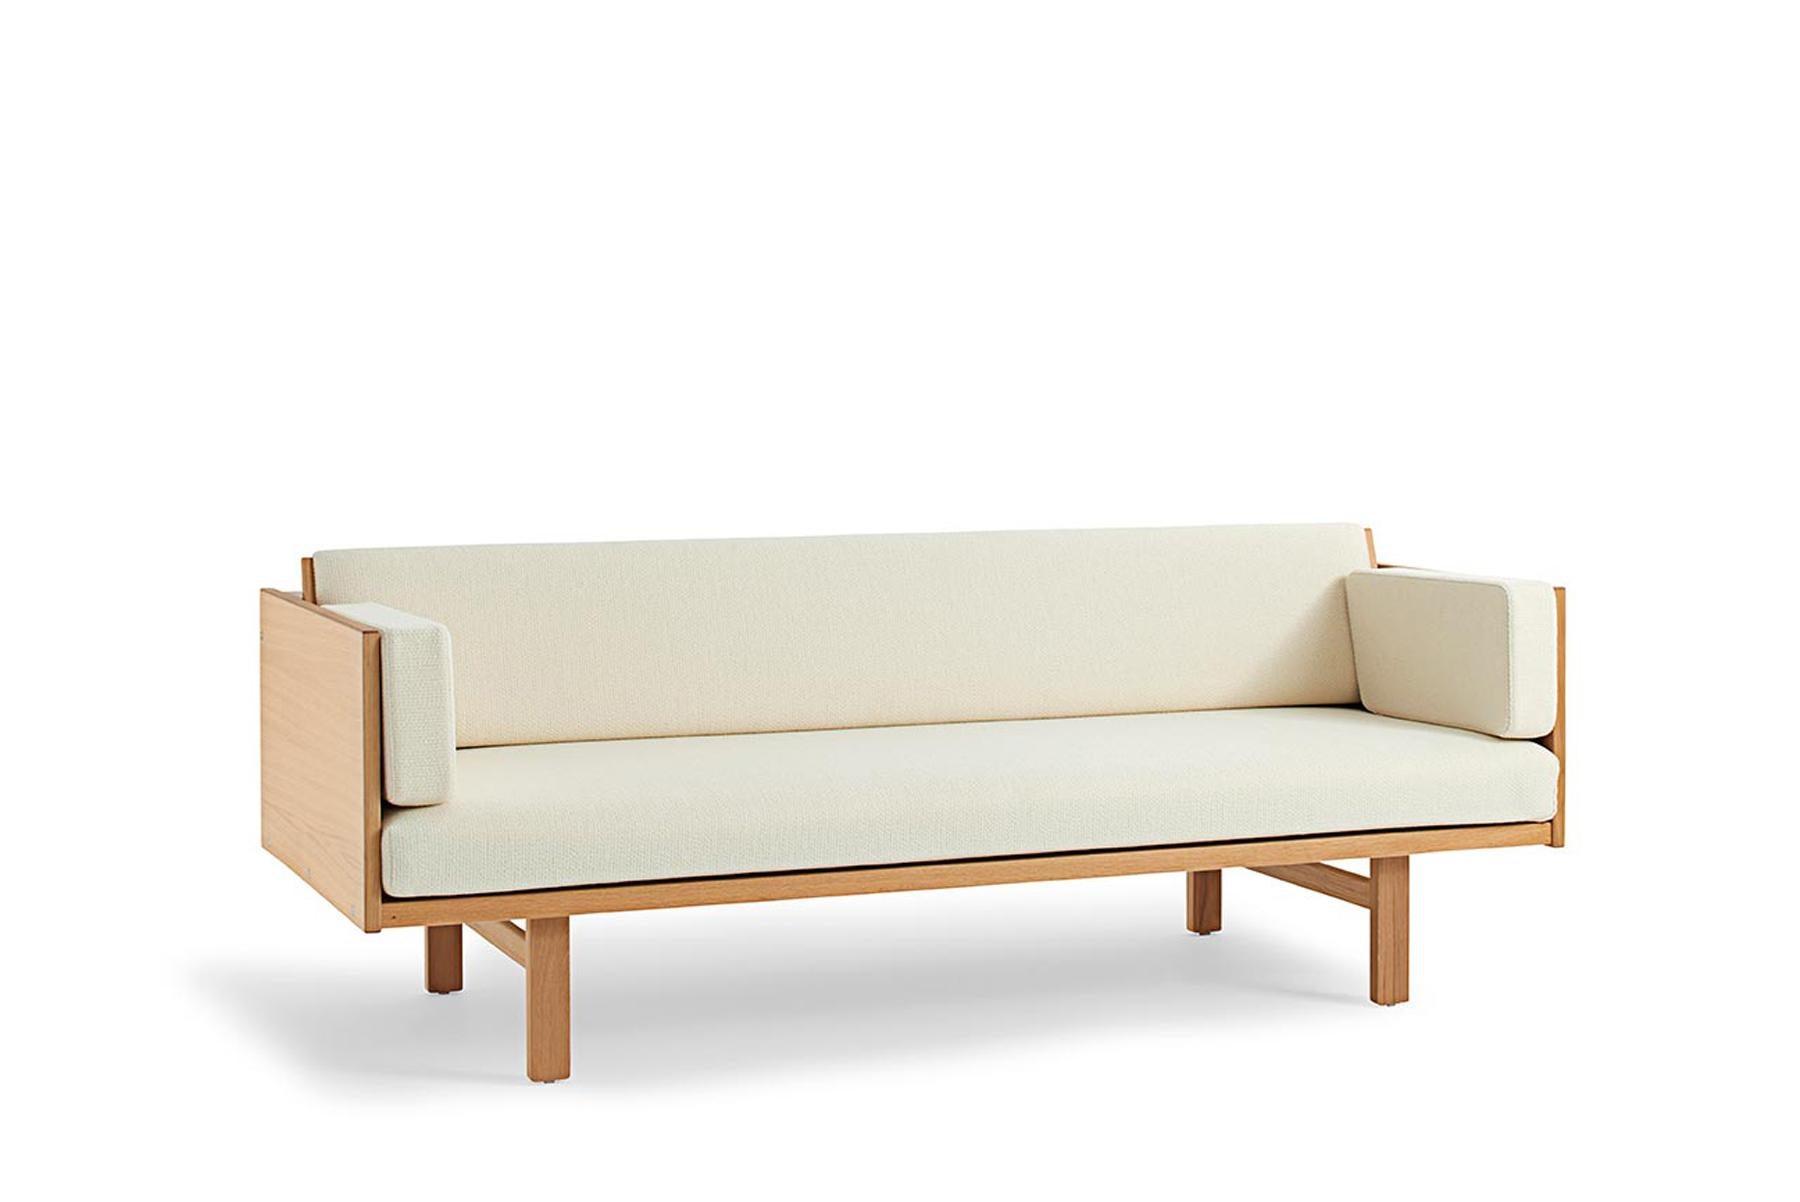 Designed by Hans Wegner in 1954, the GE 259 daybed is a versatile piece of furniture. The upholstered backrest lifts to provide a roomy bed. Crafted in solid wood, this bench is hand built at GETAMA’s factory in Gedsted, Denmark by skilled